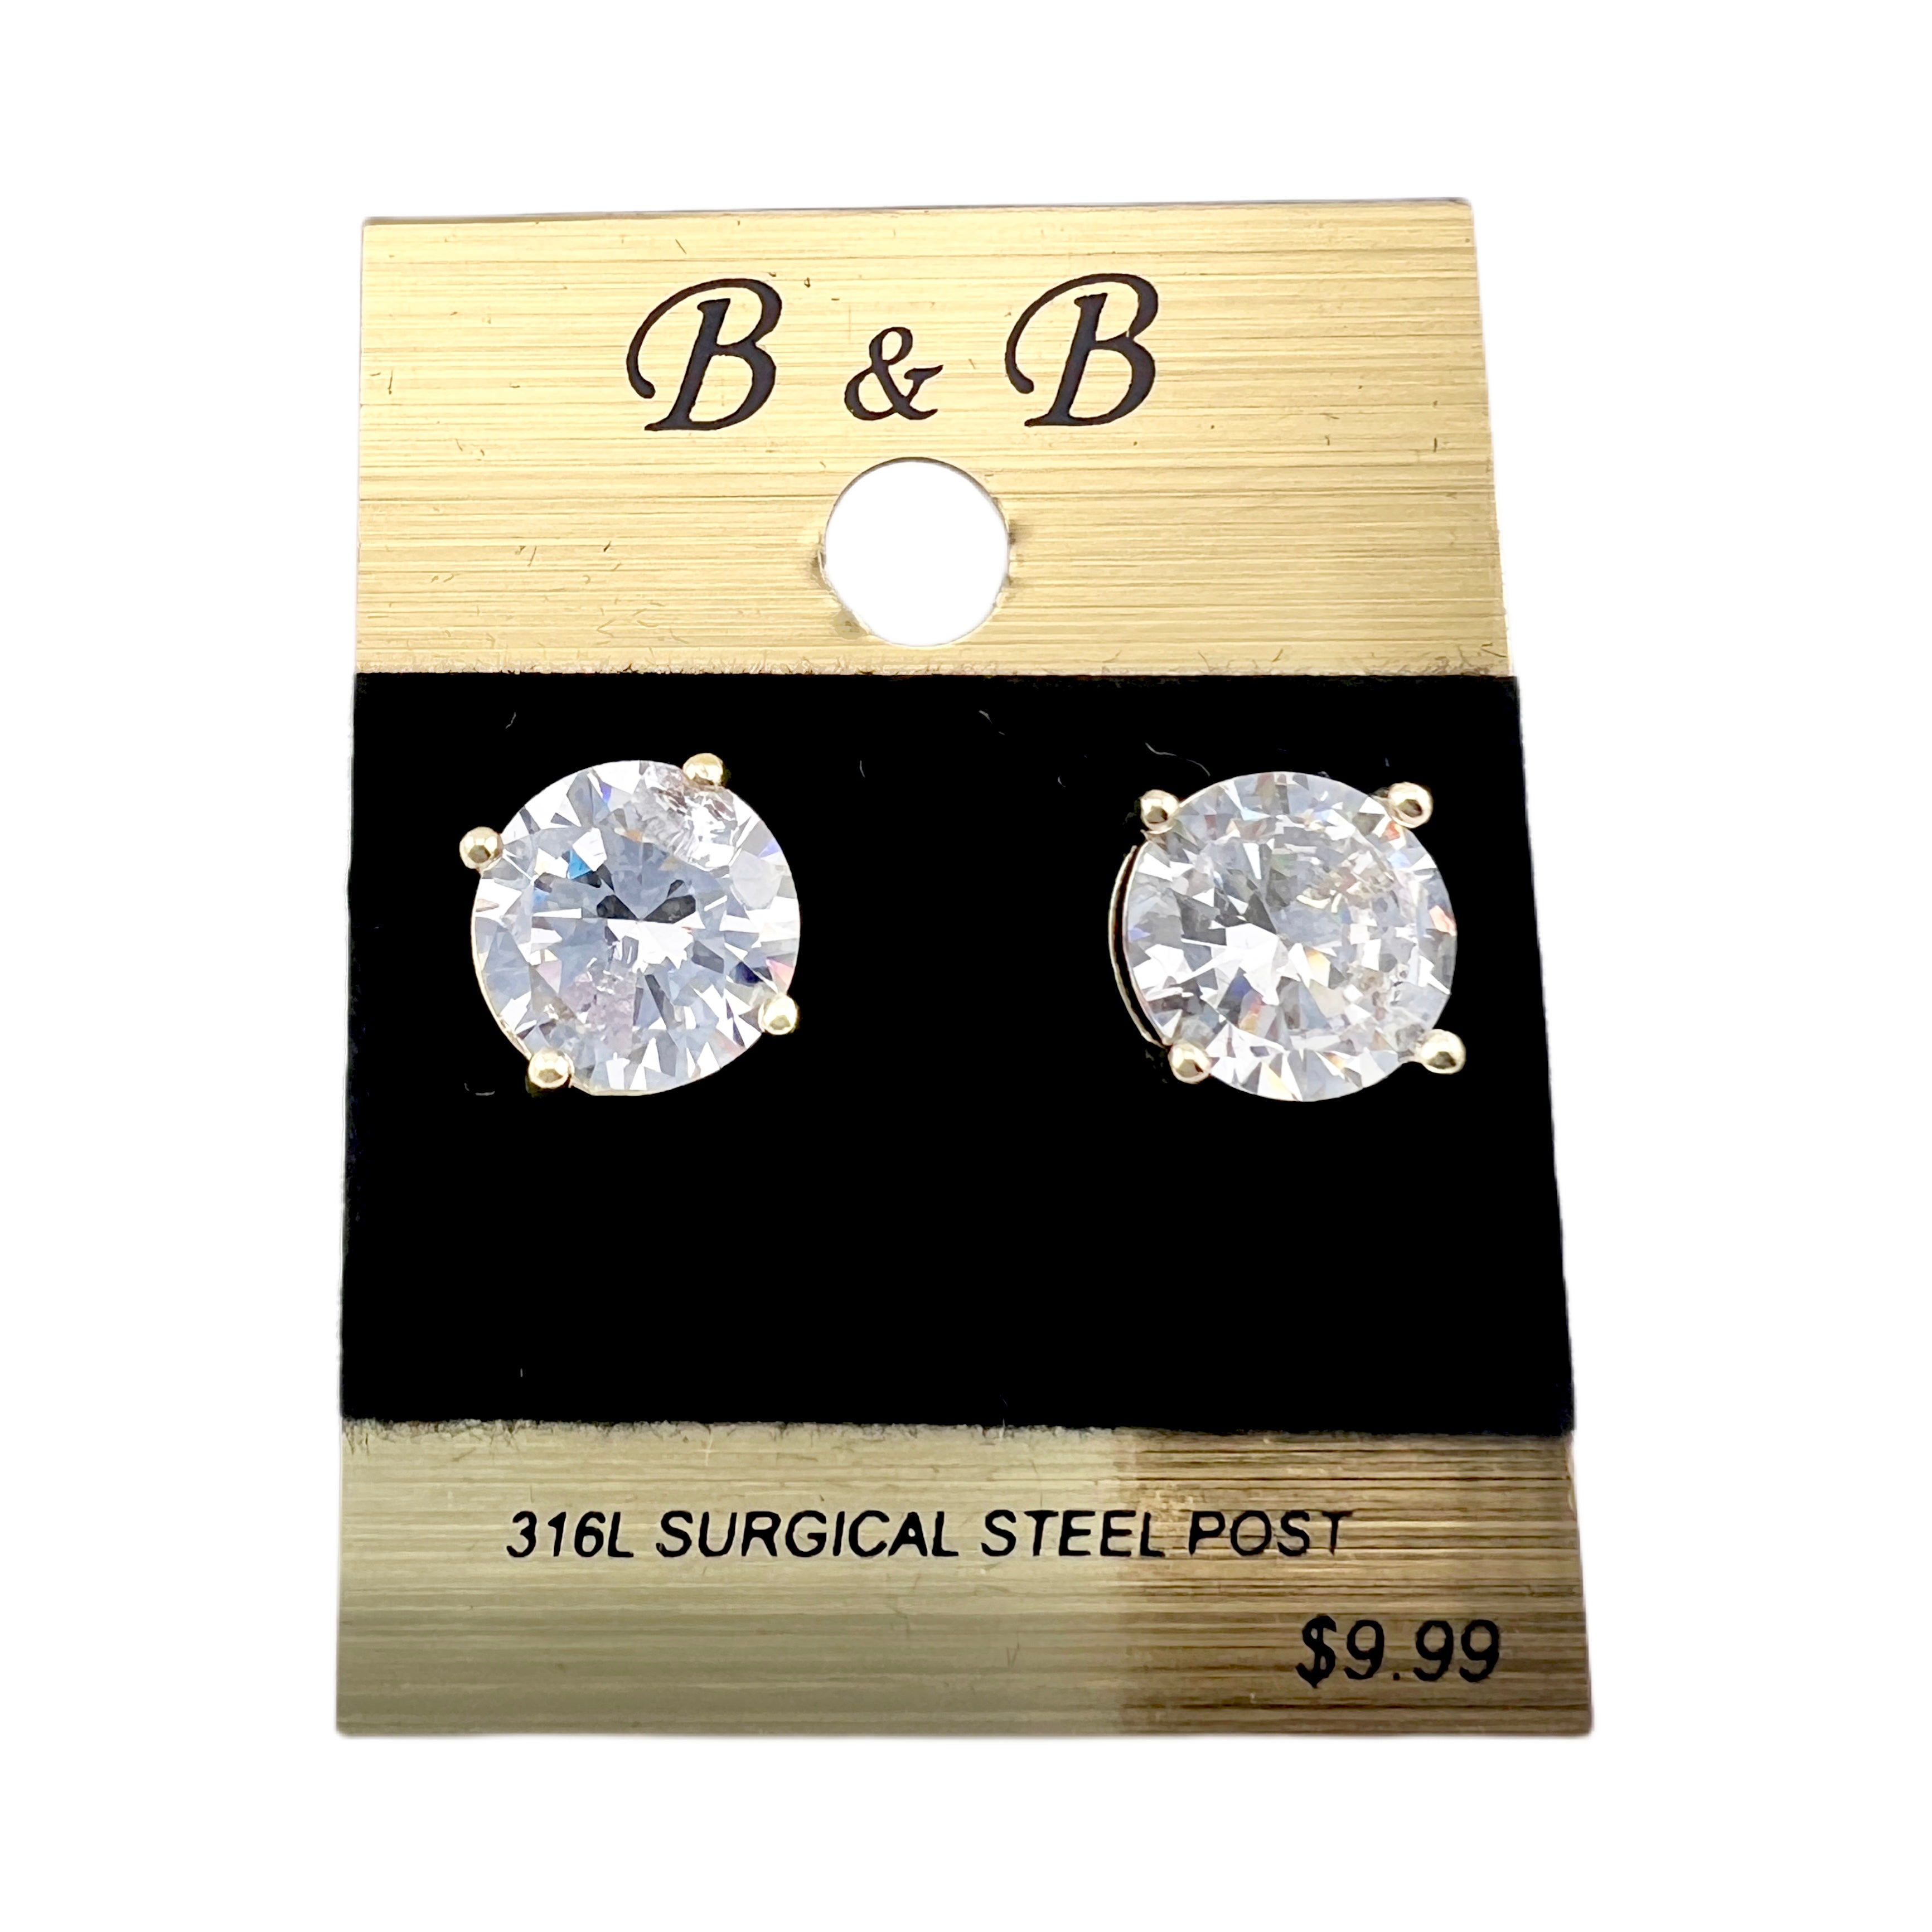 B&B Gold Color Cubic Zirconia Round Stud Earrings